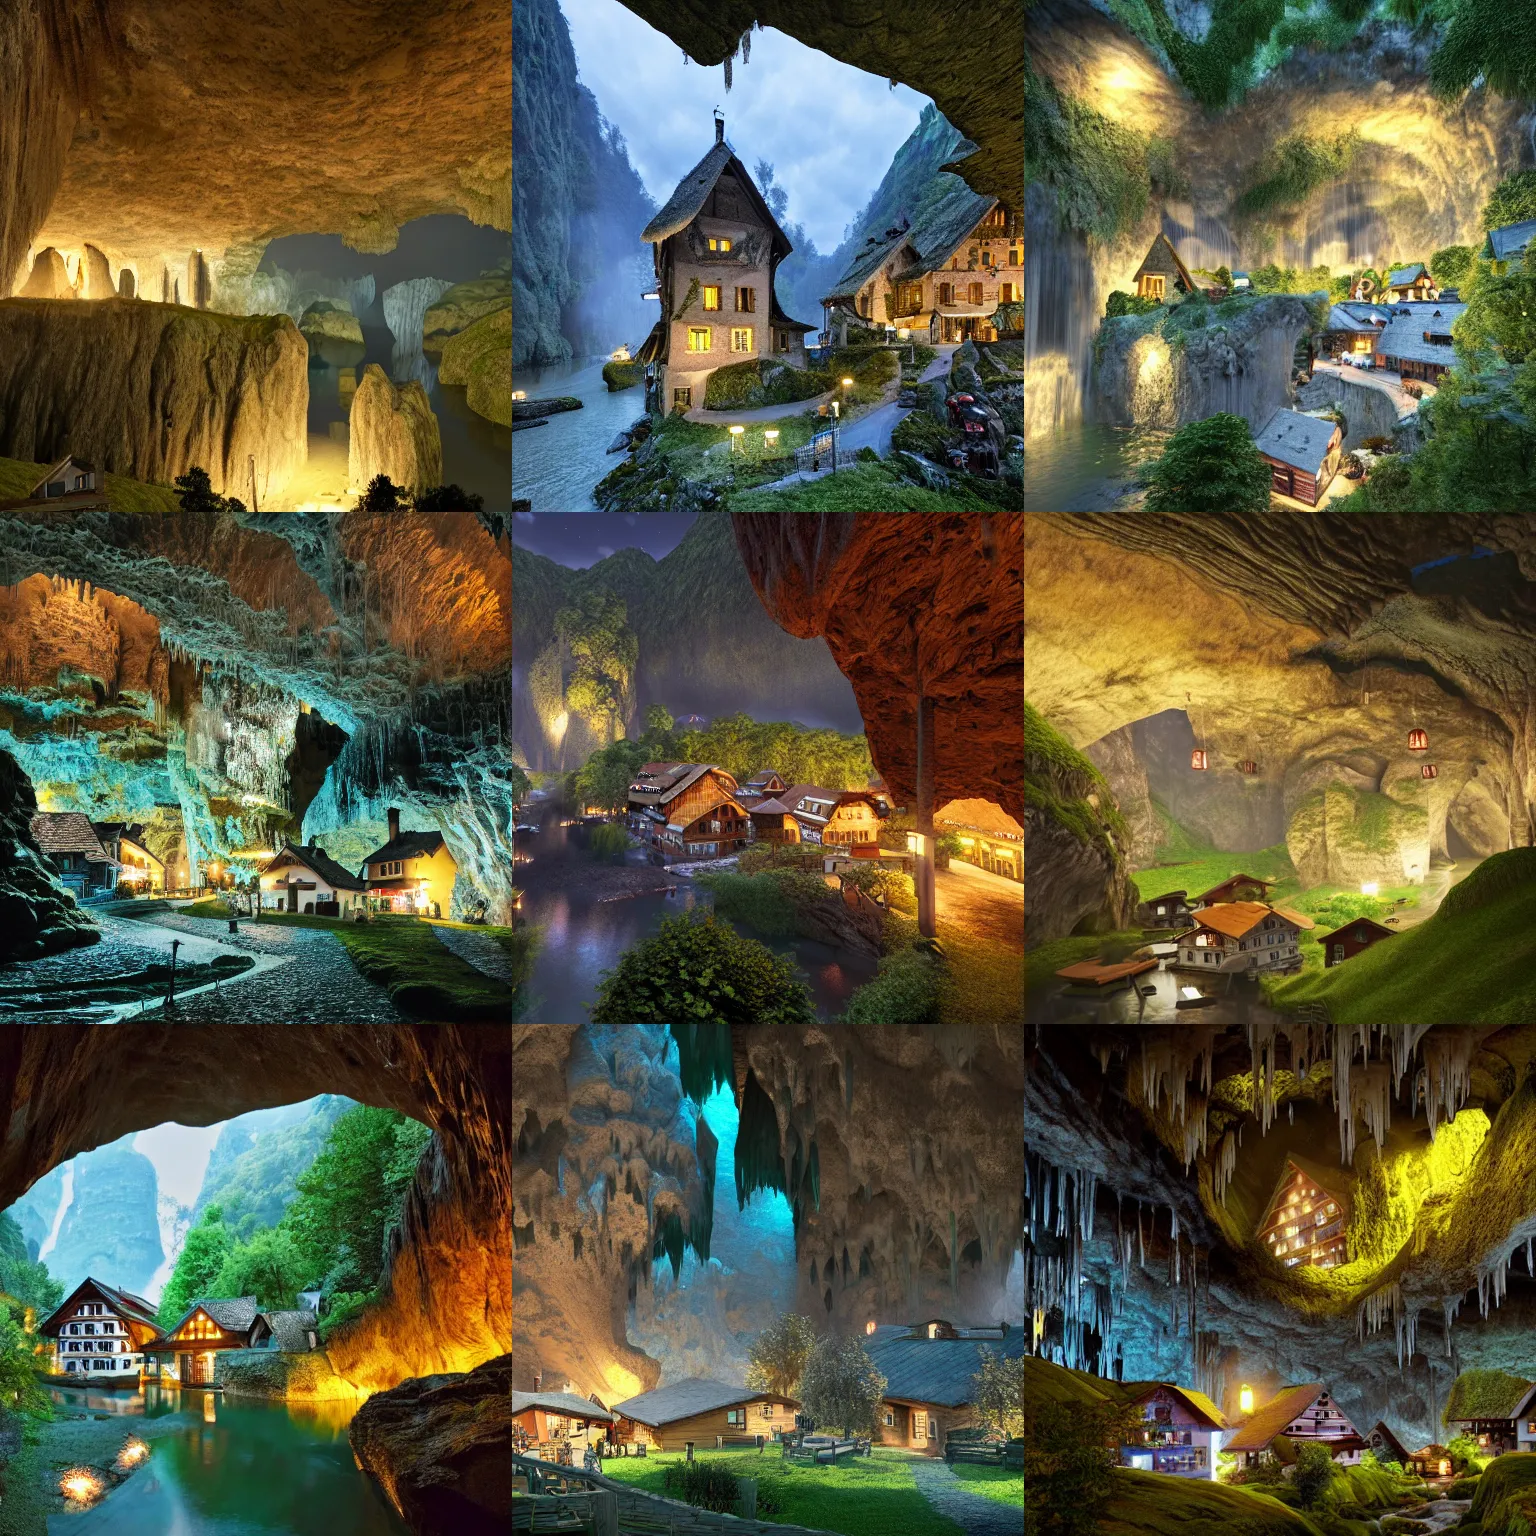 Prompt: a quaint swiss village at night with cottages, a river with sawmills, glowing lights and green park land, all inside an enormous cavern, cavern ceiling visible with large stalactites, unreal engine, by conrad martens